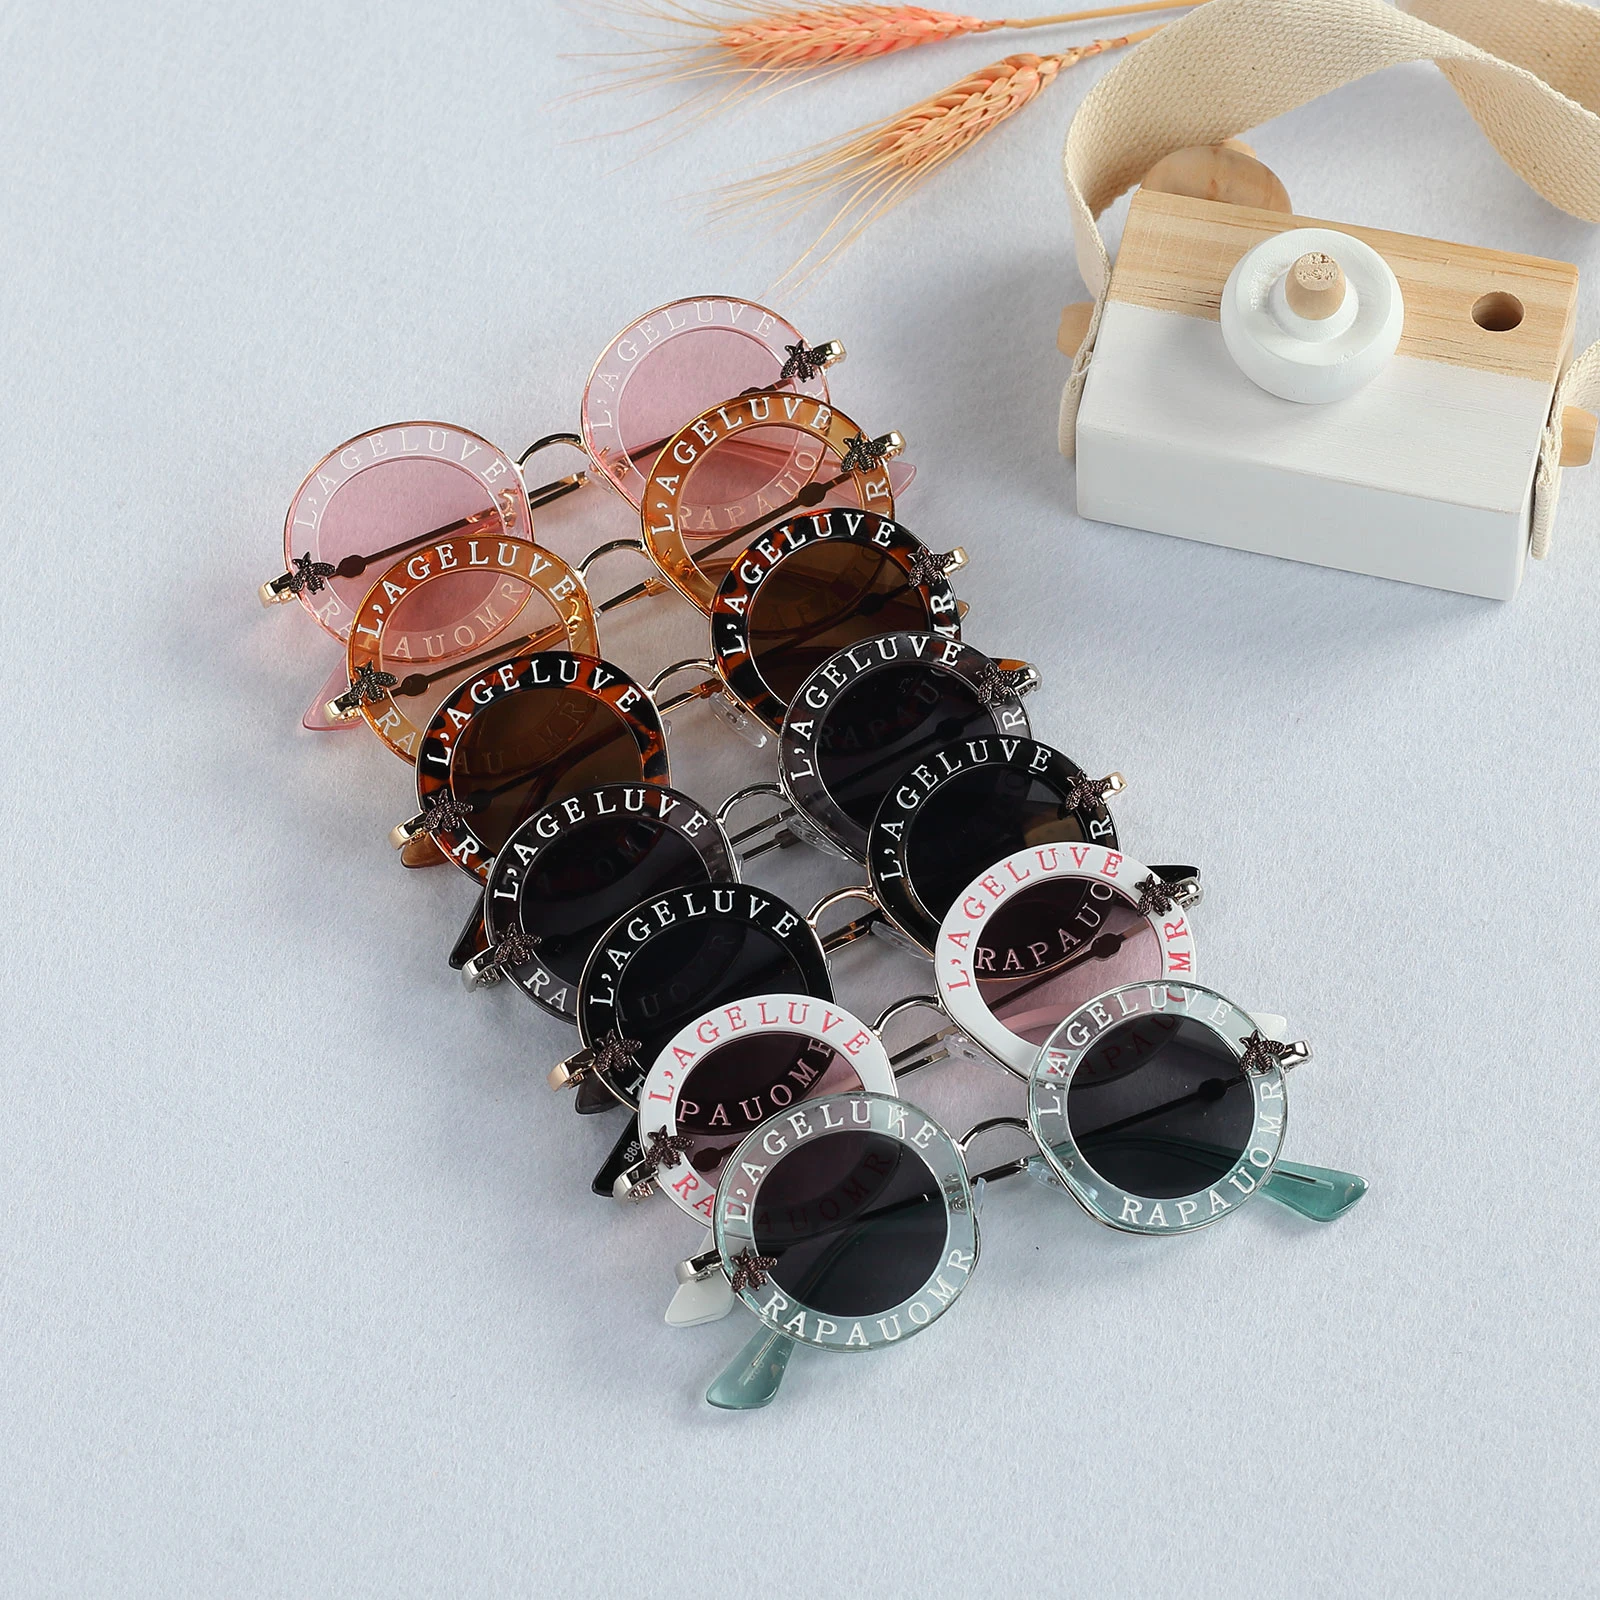 2019 New Infant Kids Baby Girls Boys Fashion Sunglasses Letter Solid Hot Sun Glasses 7 Colors